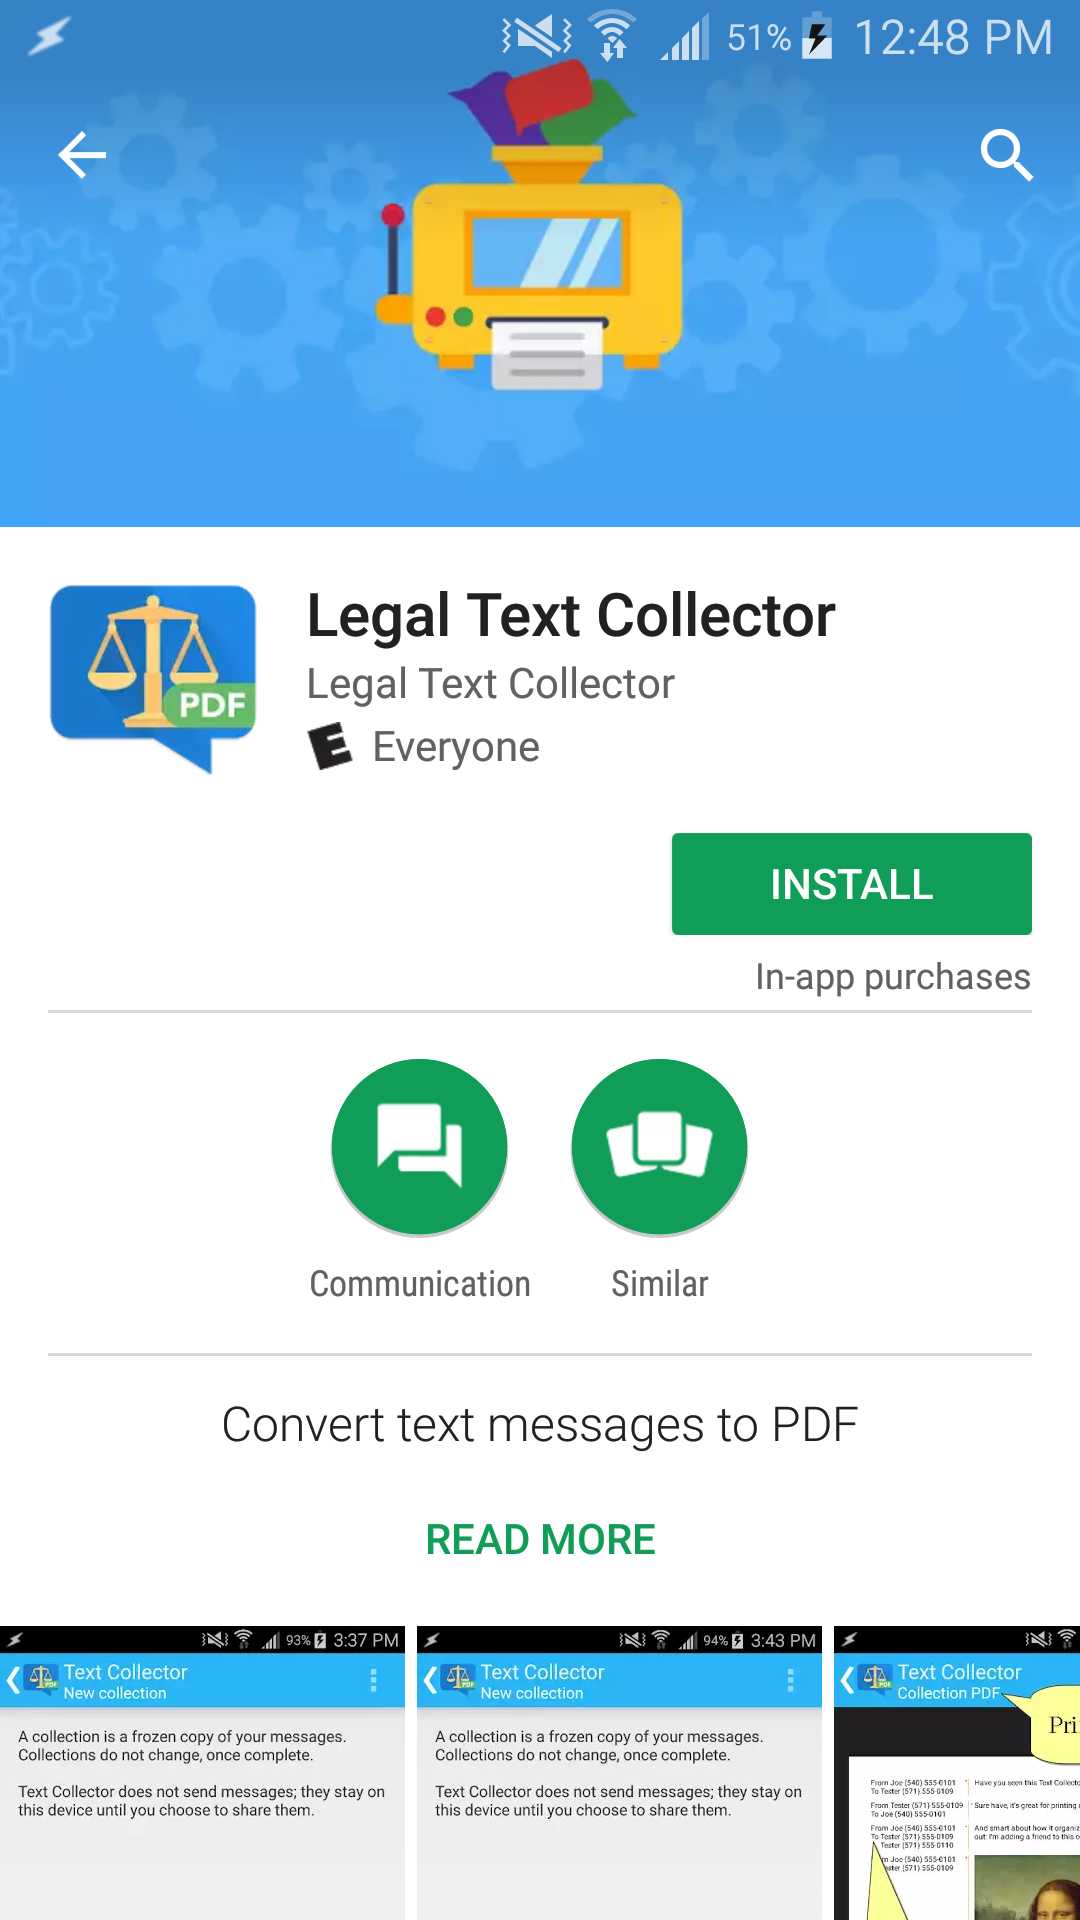 Text Collector in the Google Play store